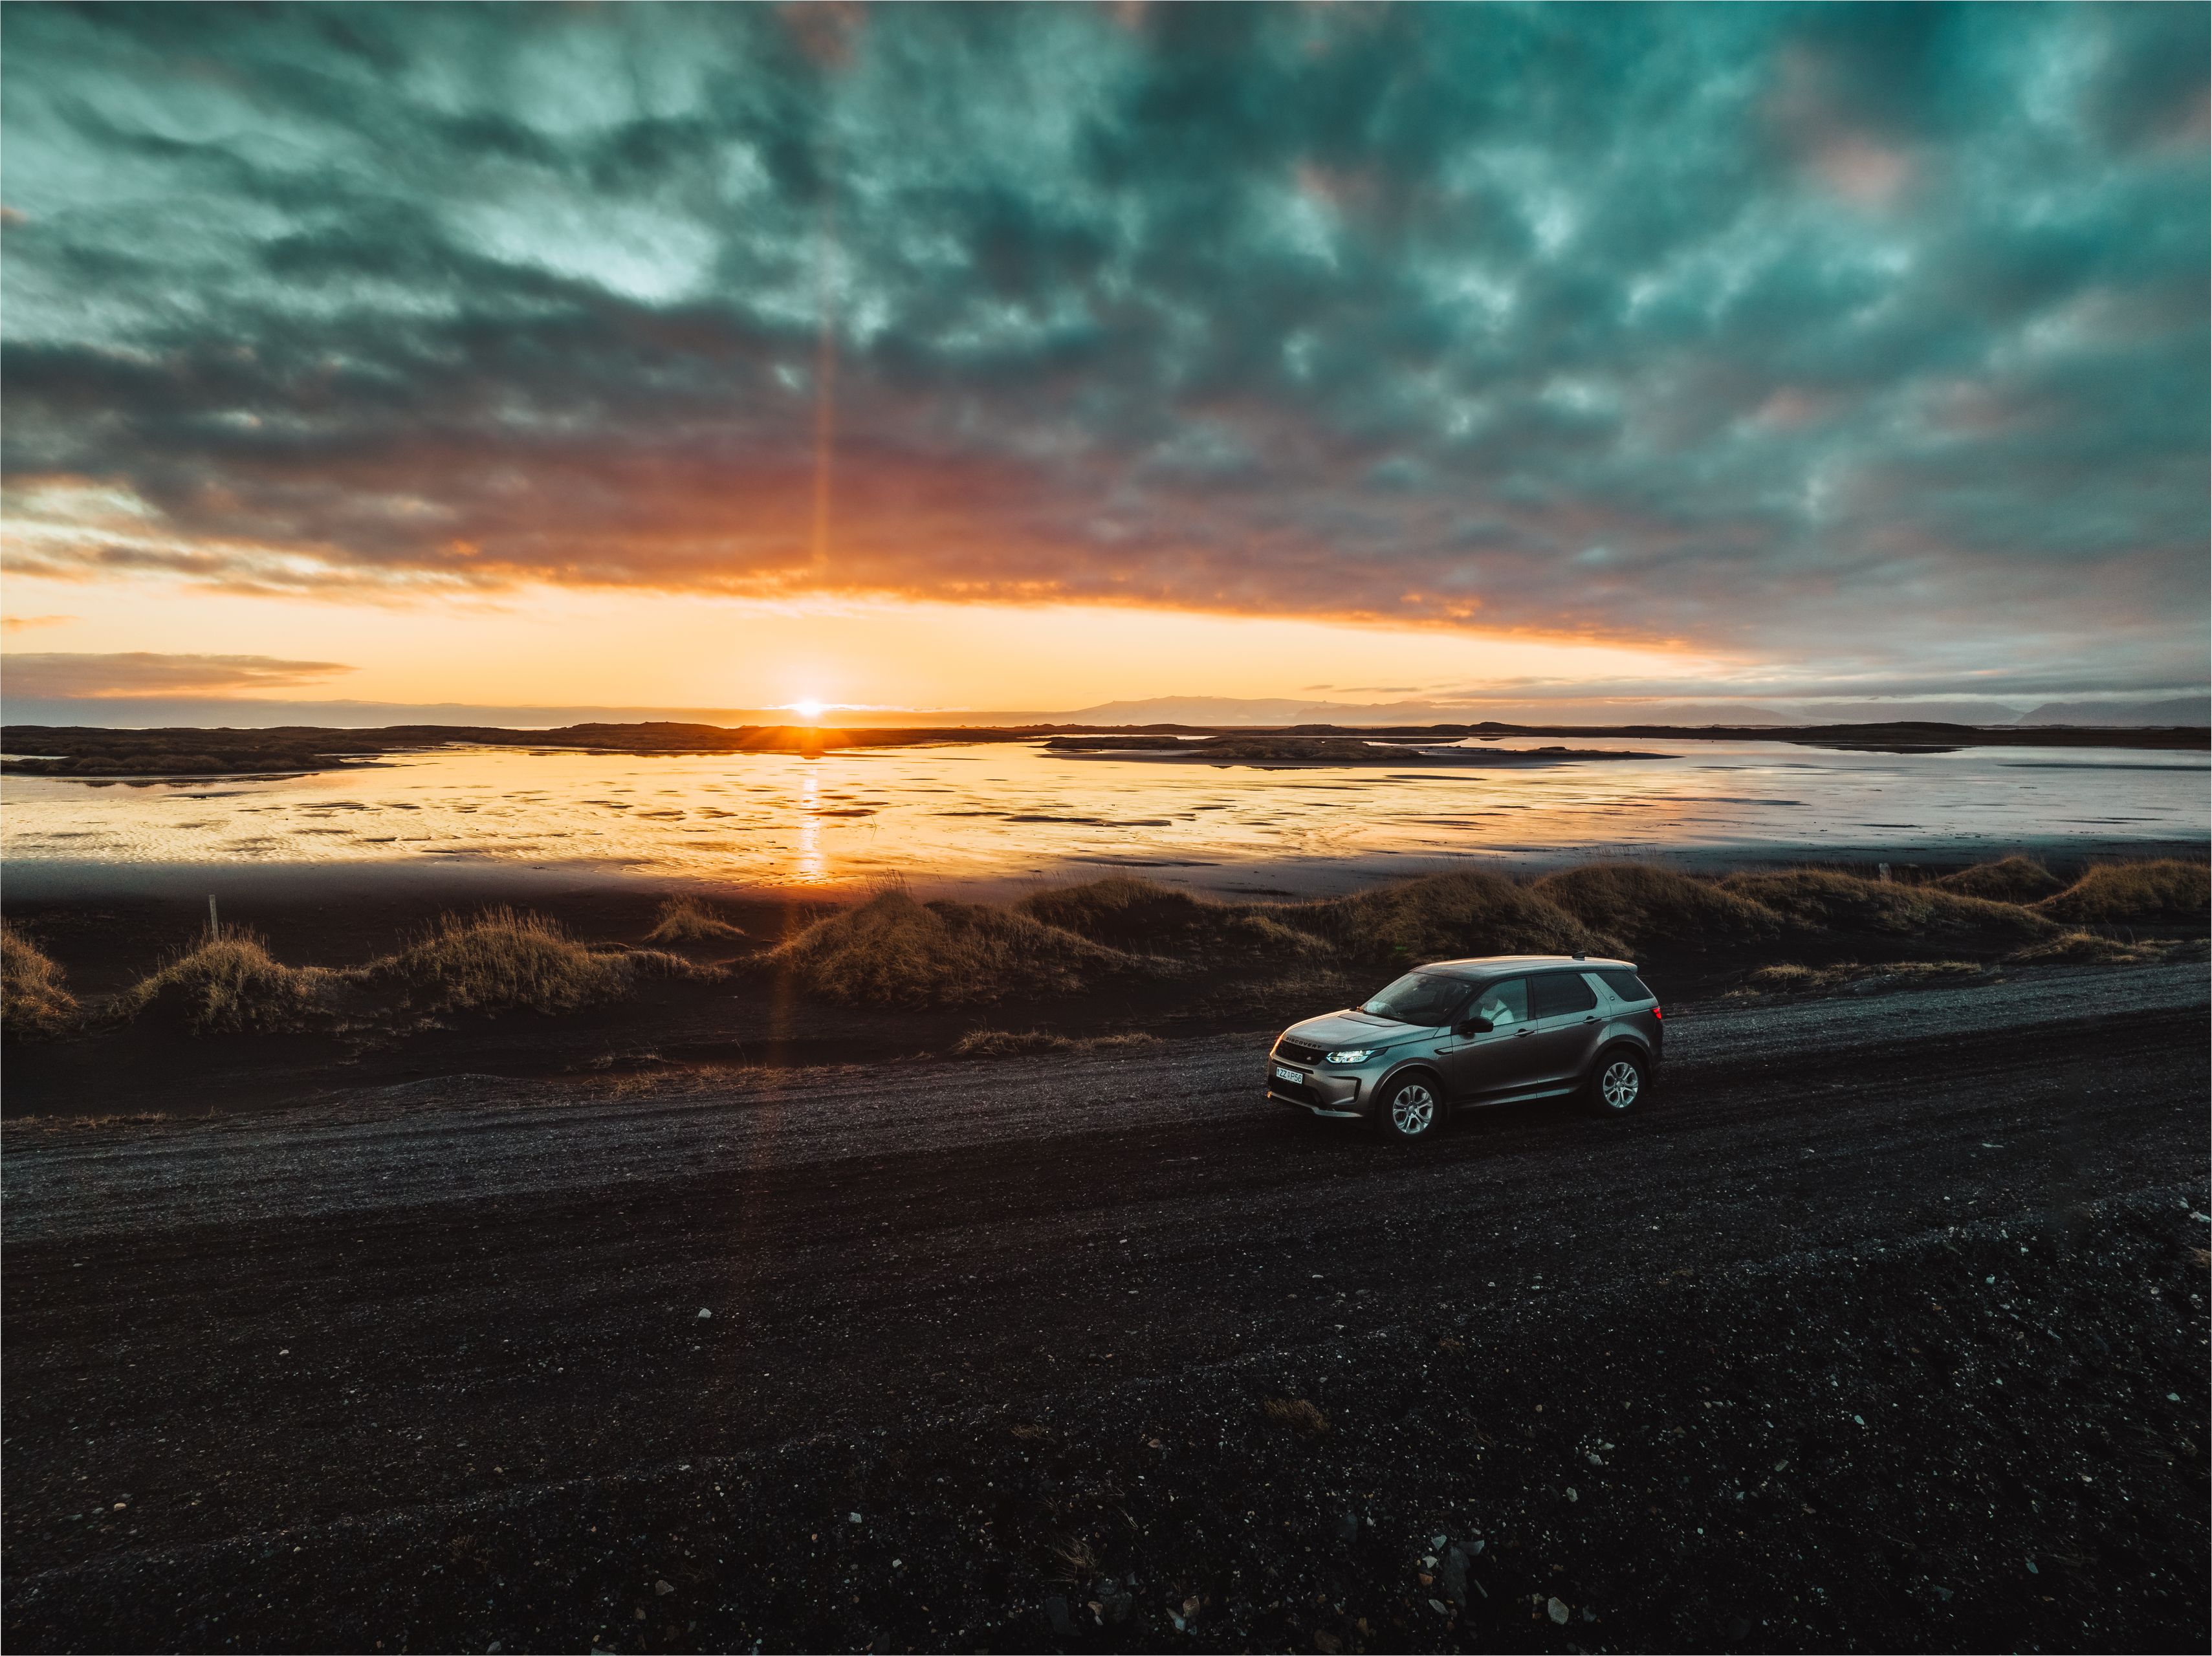 A Discovery Sport 4x4 Rental Car in Iceland looking at the sunset